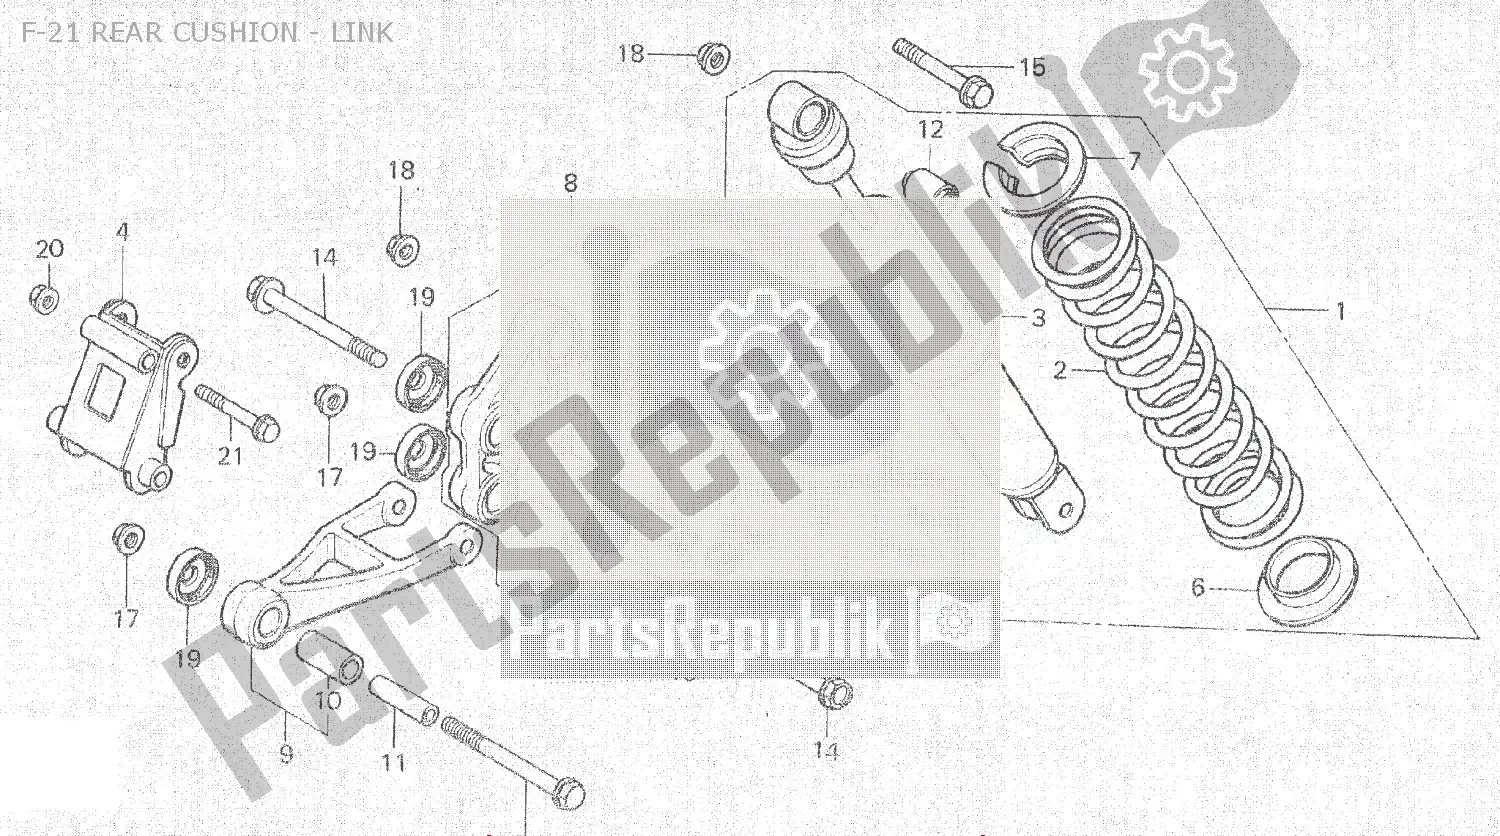 All parts for the F-21 Rear Cushion - Link of the Honda MBX 80 1983